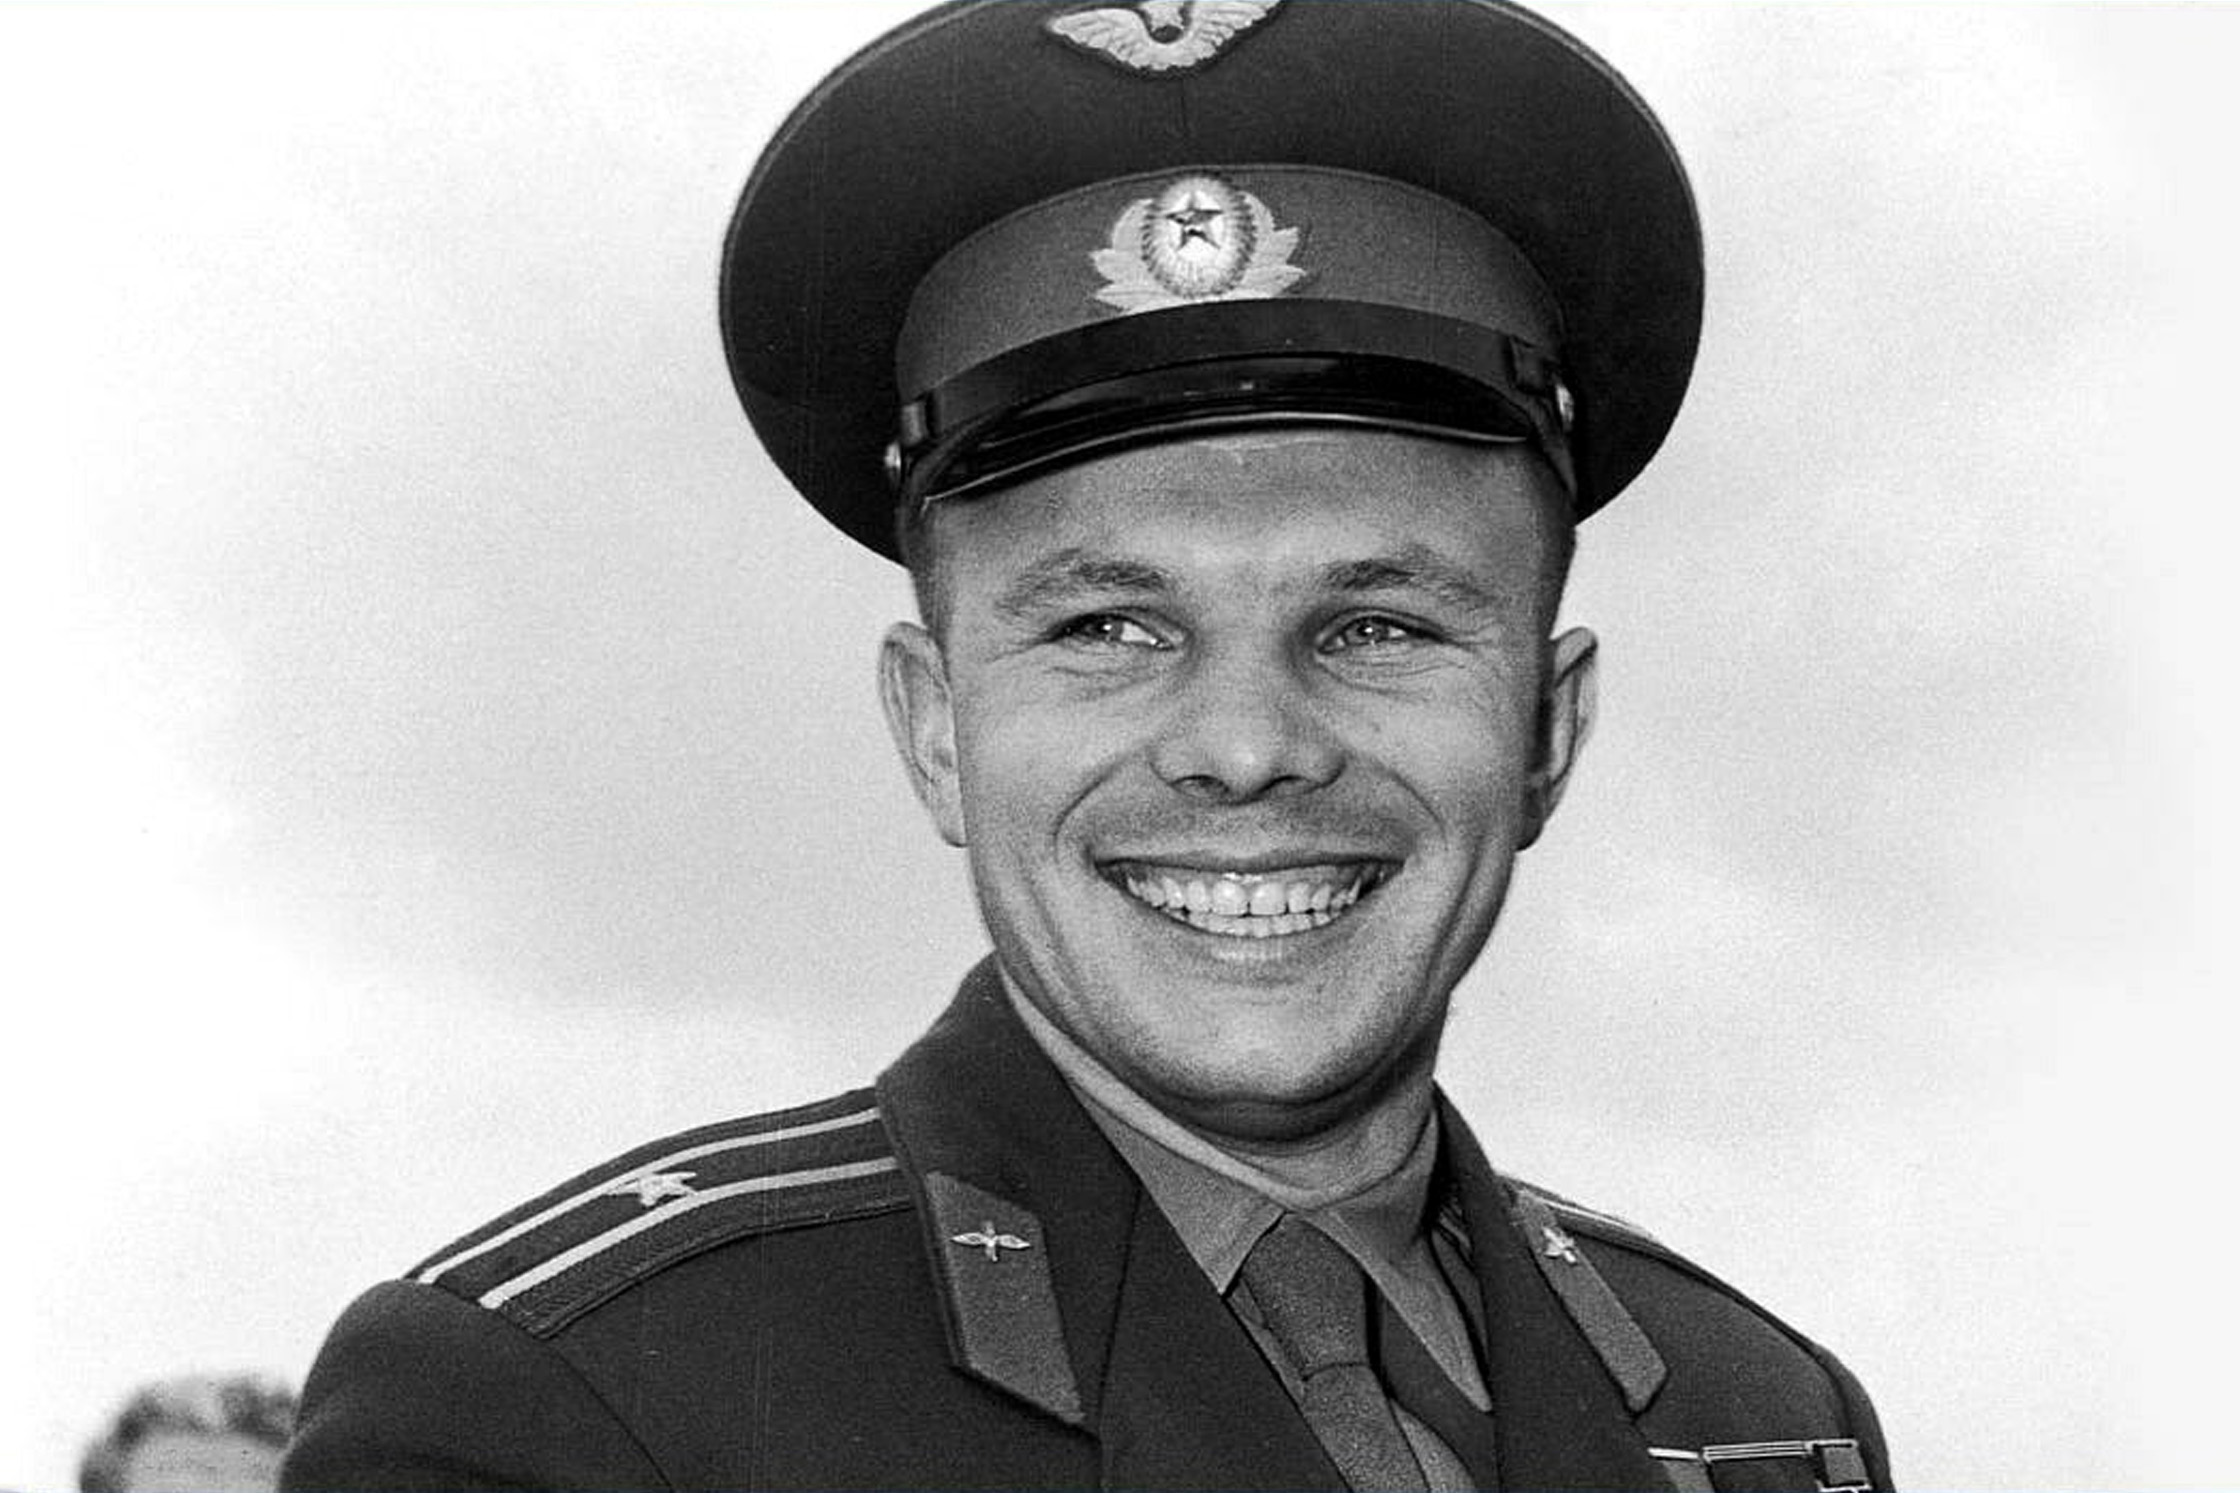 The secrecy stamp was removed from Gagarin's personal file